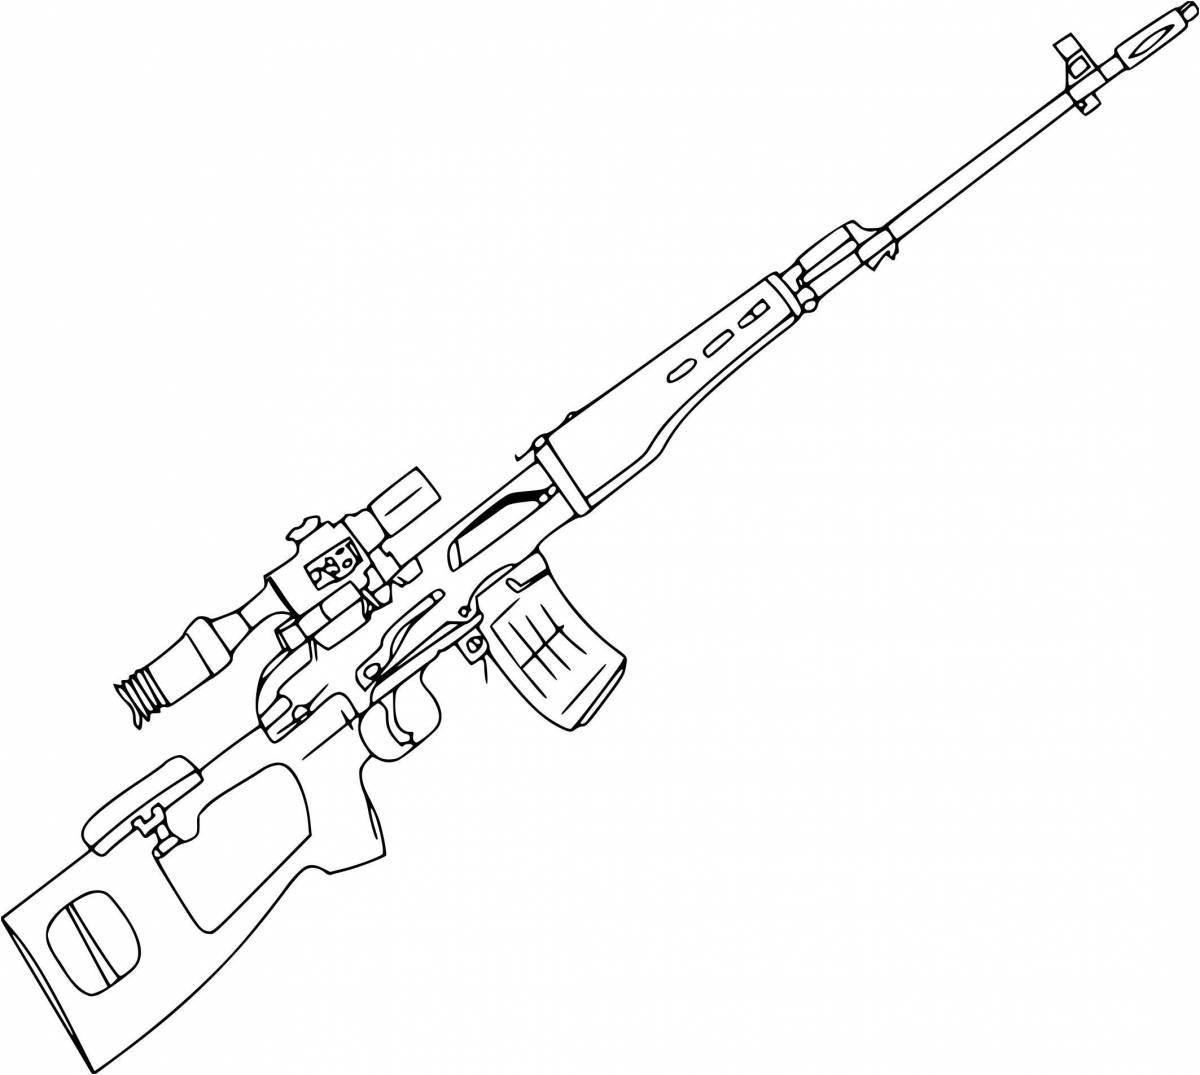 Playful rifle coloring page